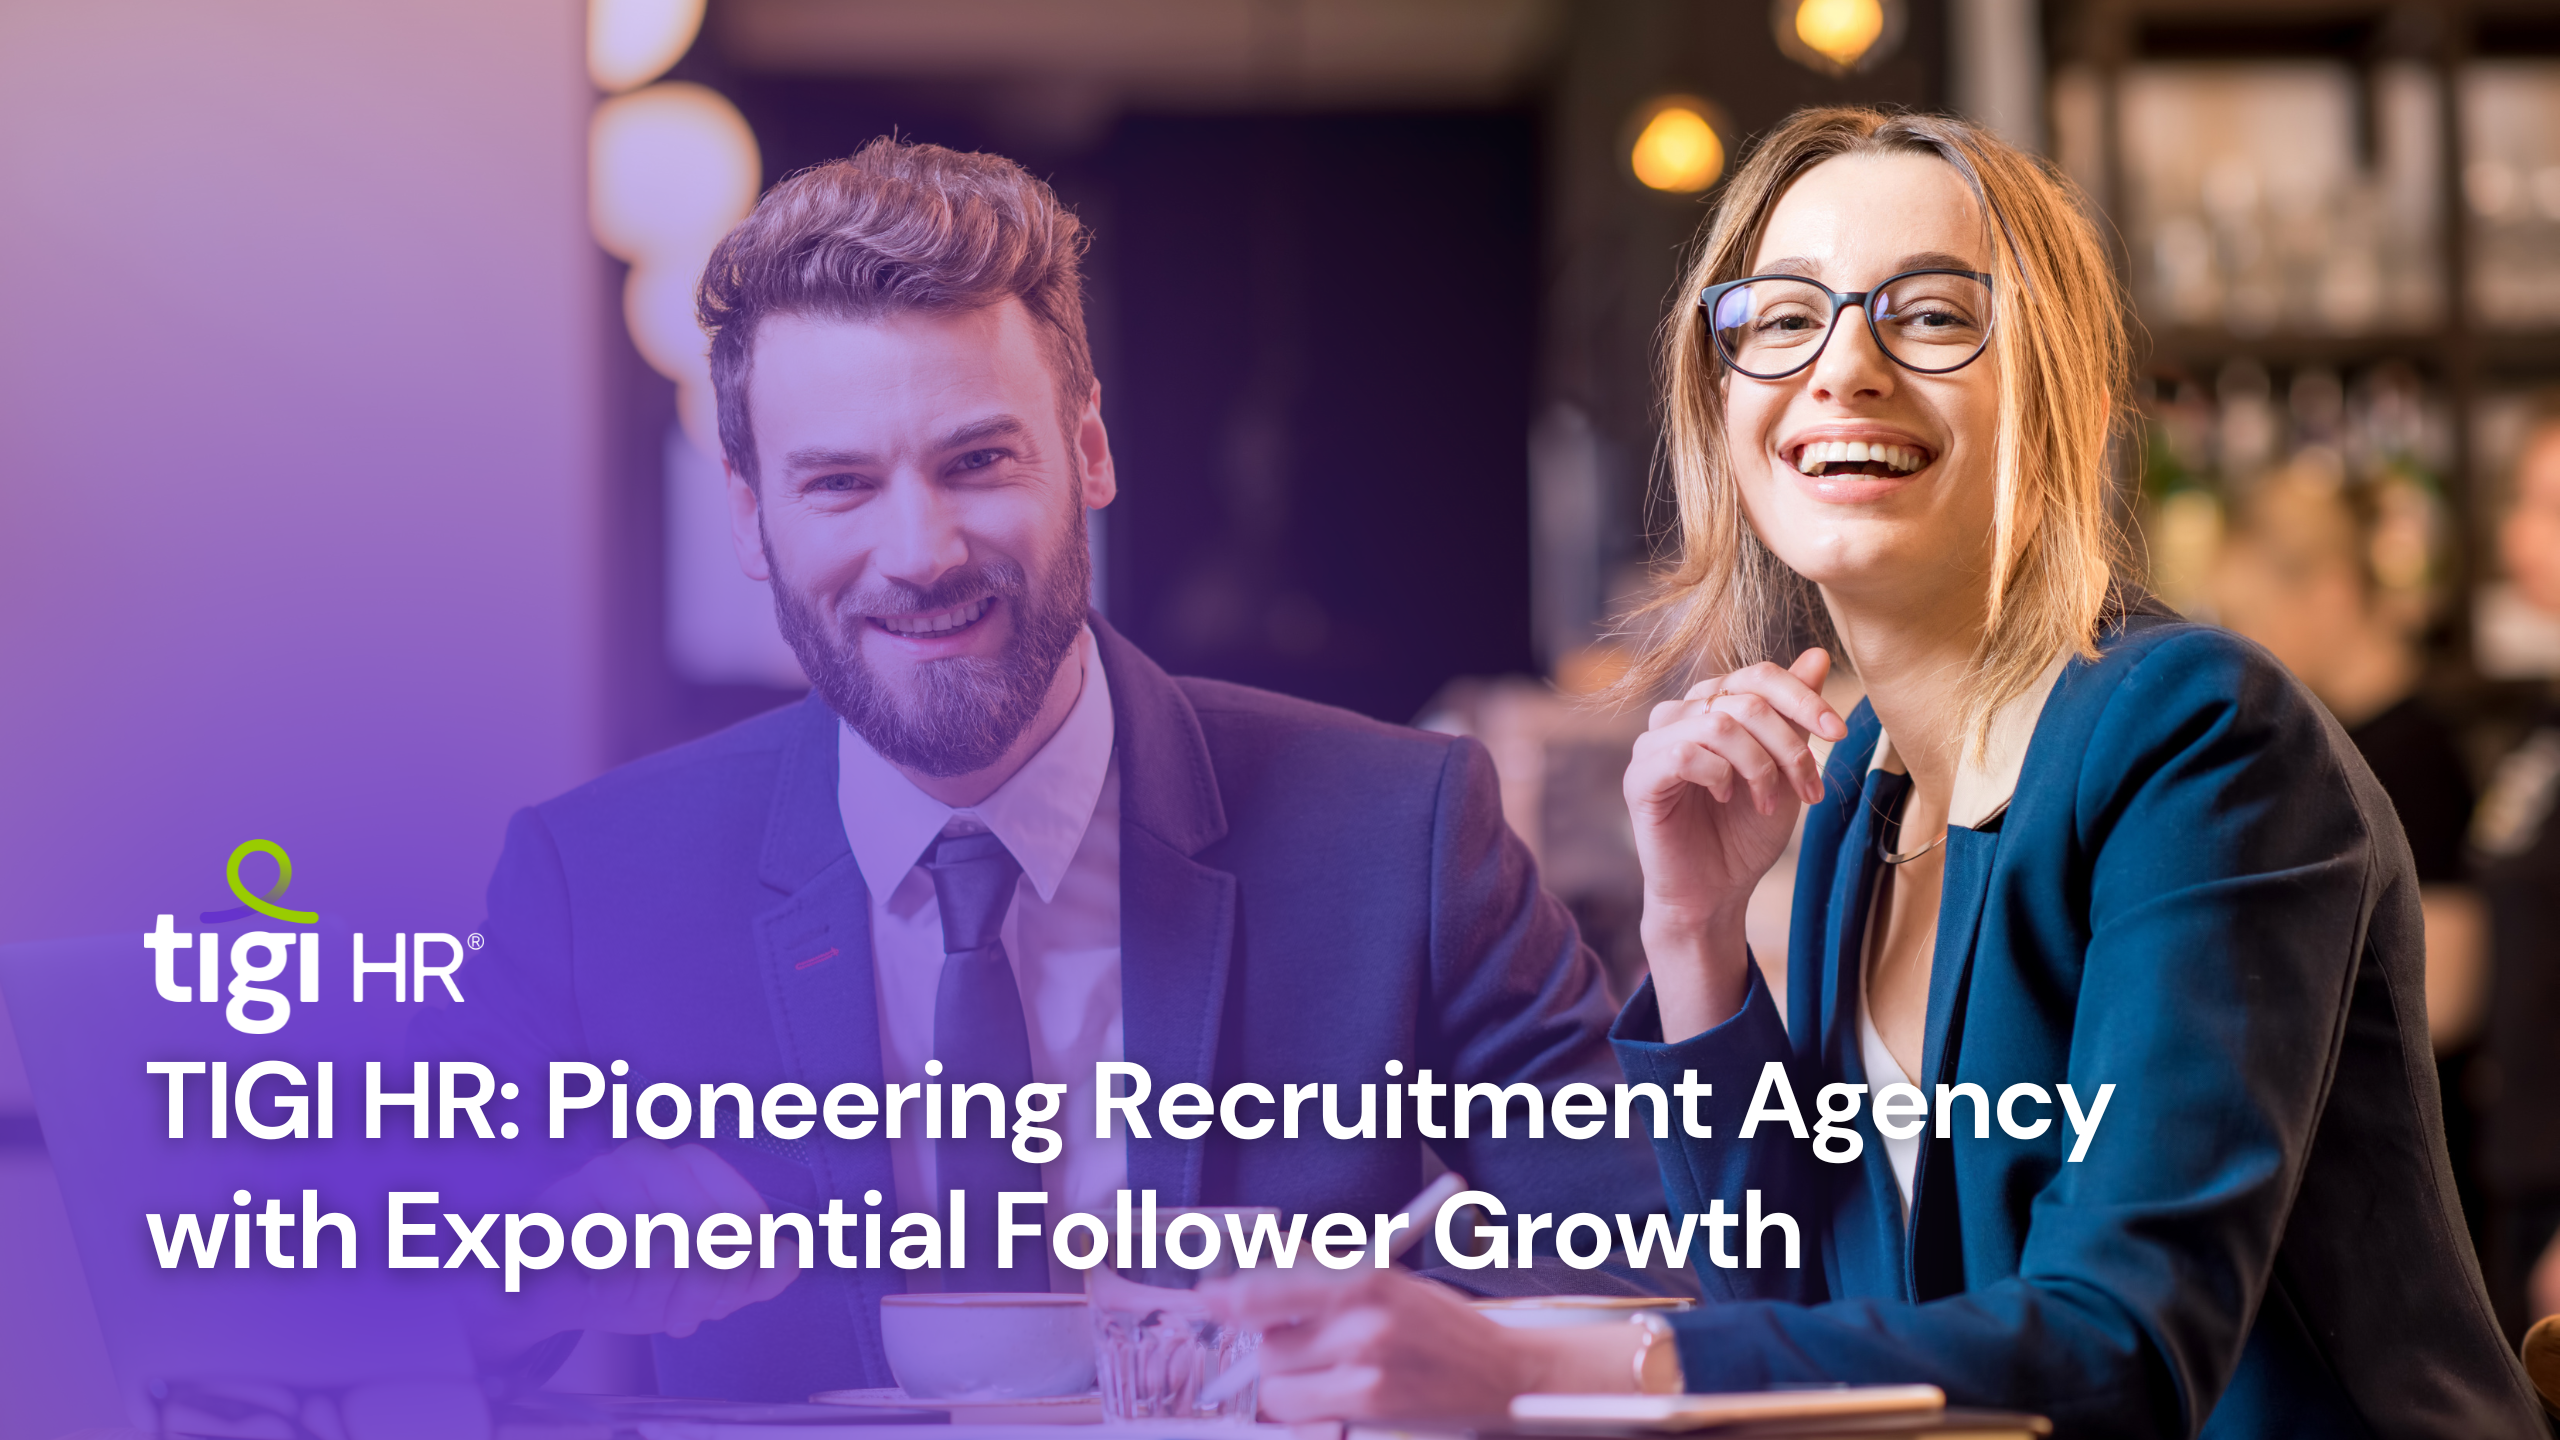 TIGI HR Pioneering Recruitment Agency with Exponential Follower Growth